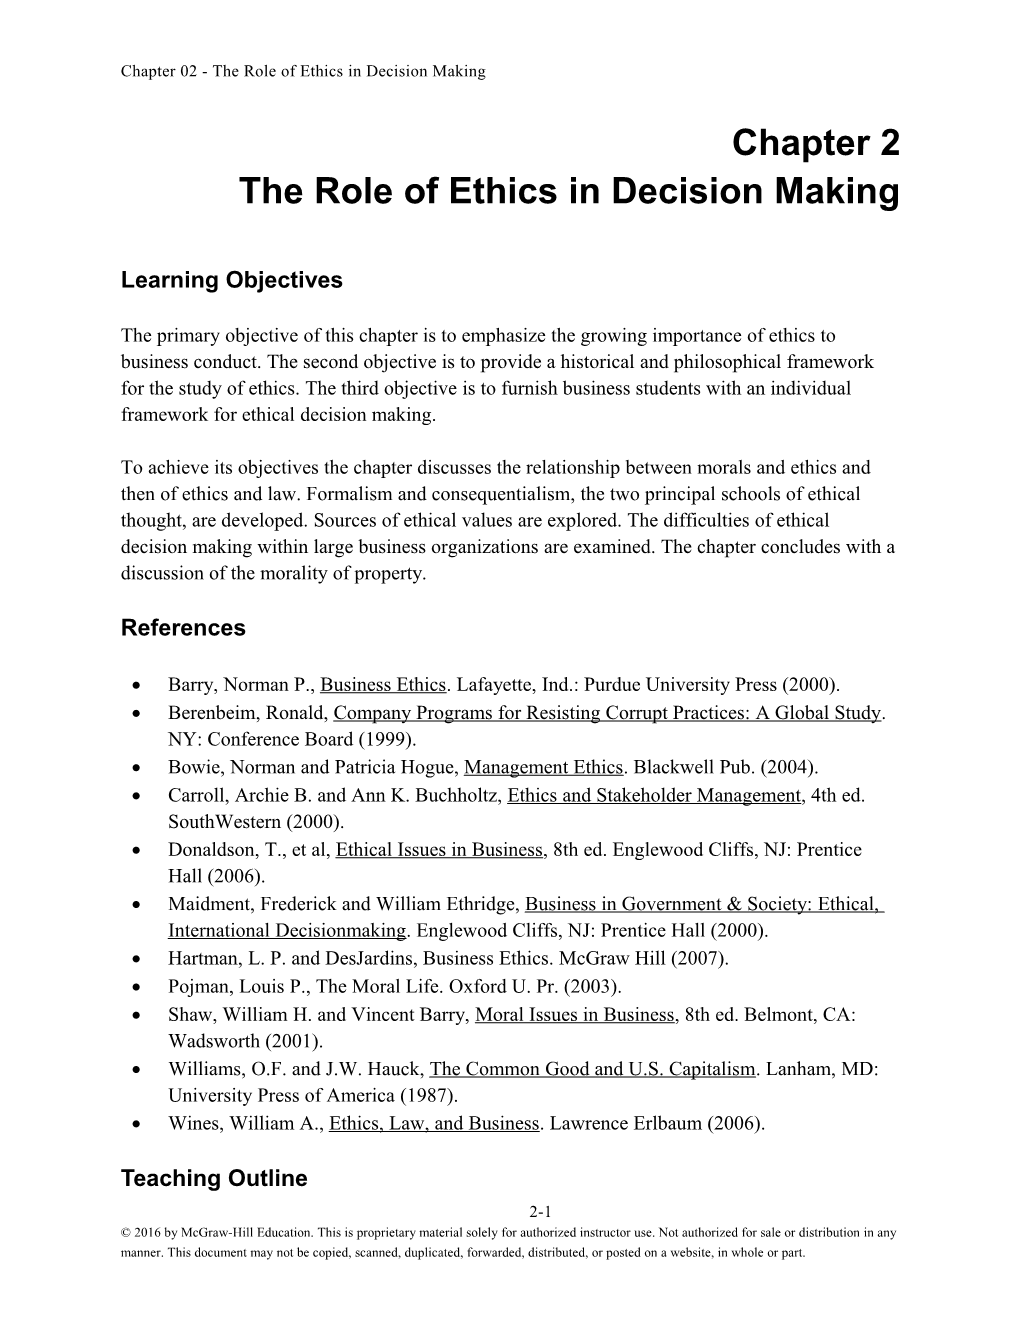 Chapter 02 - the Role of Ethics in Decision Making